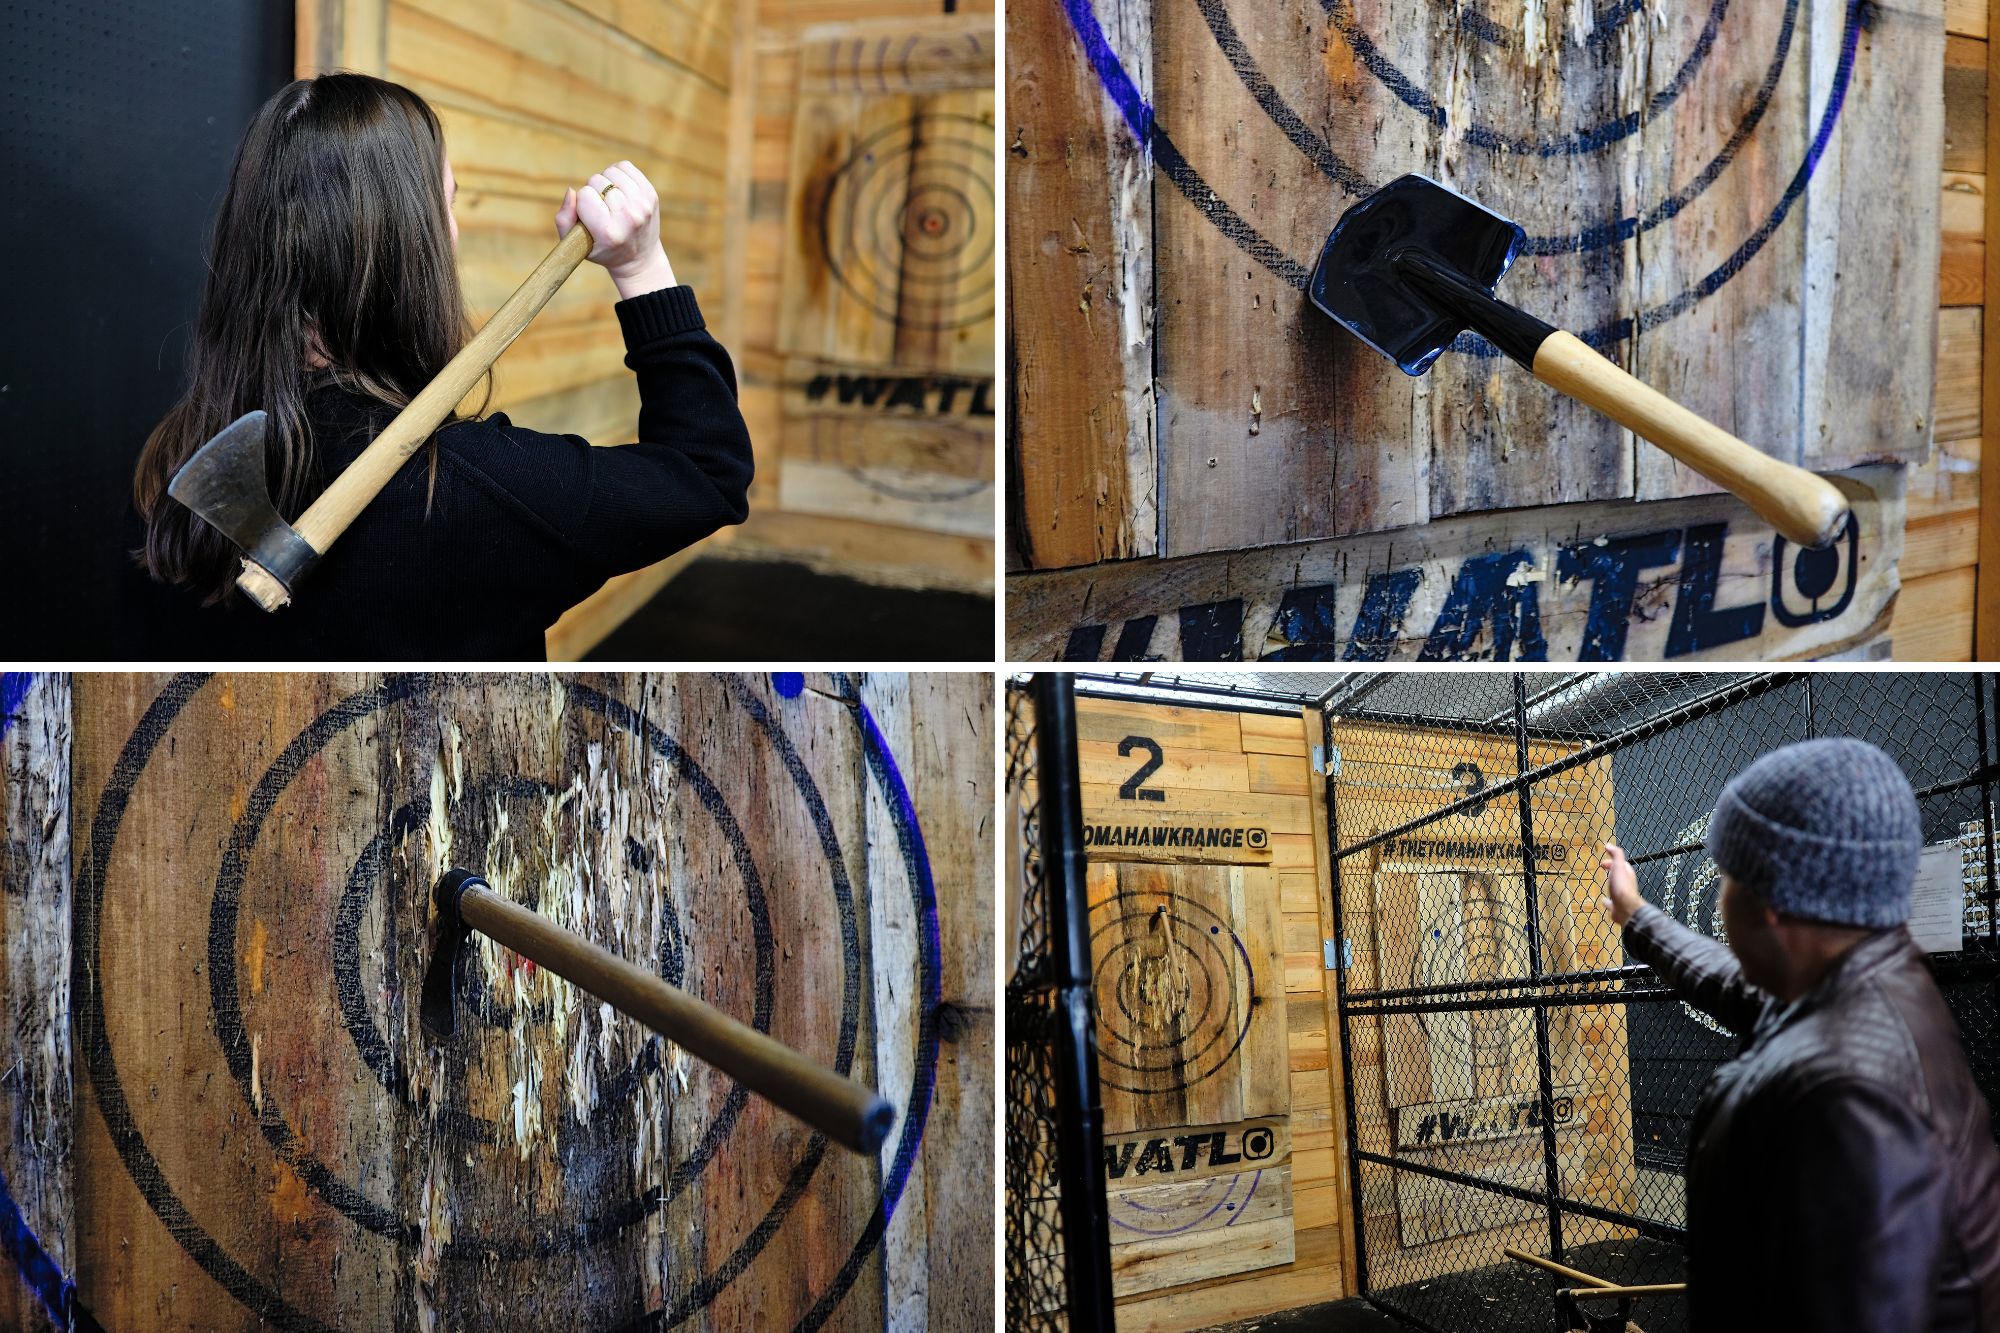 Collage of Alyssa and Michael throwing axes and shovels at The Tomahawk Throwing Range & Blade Shop